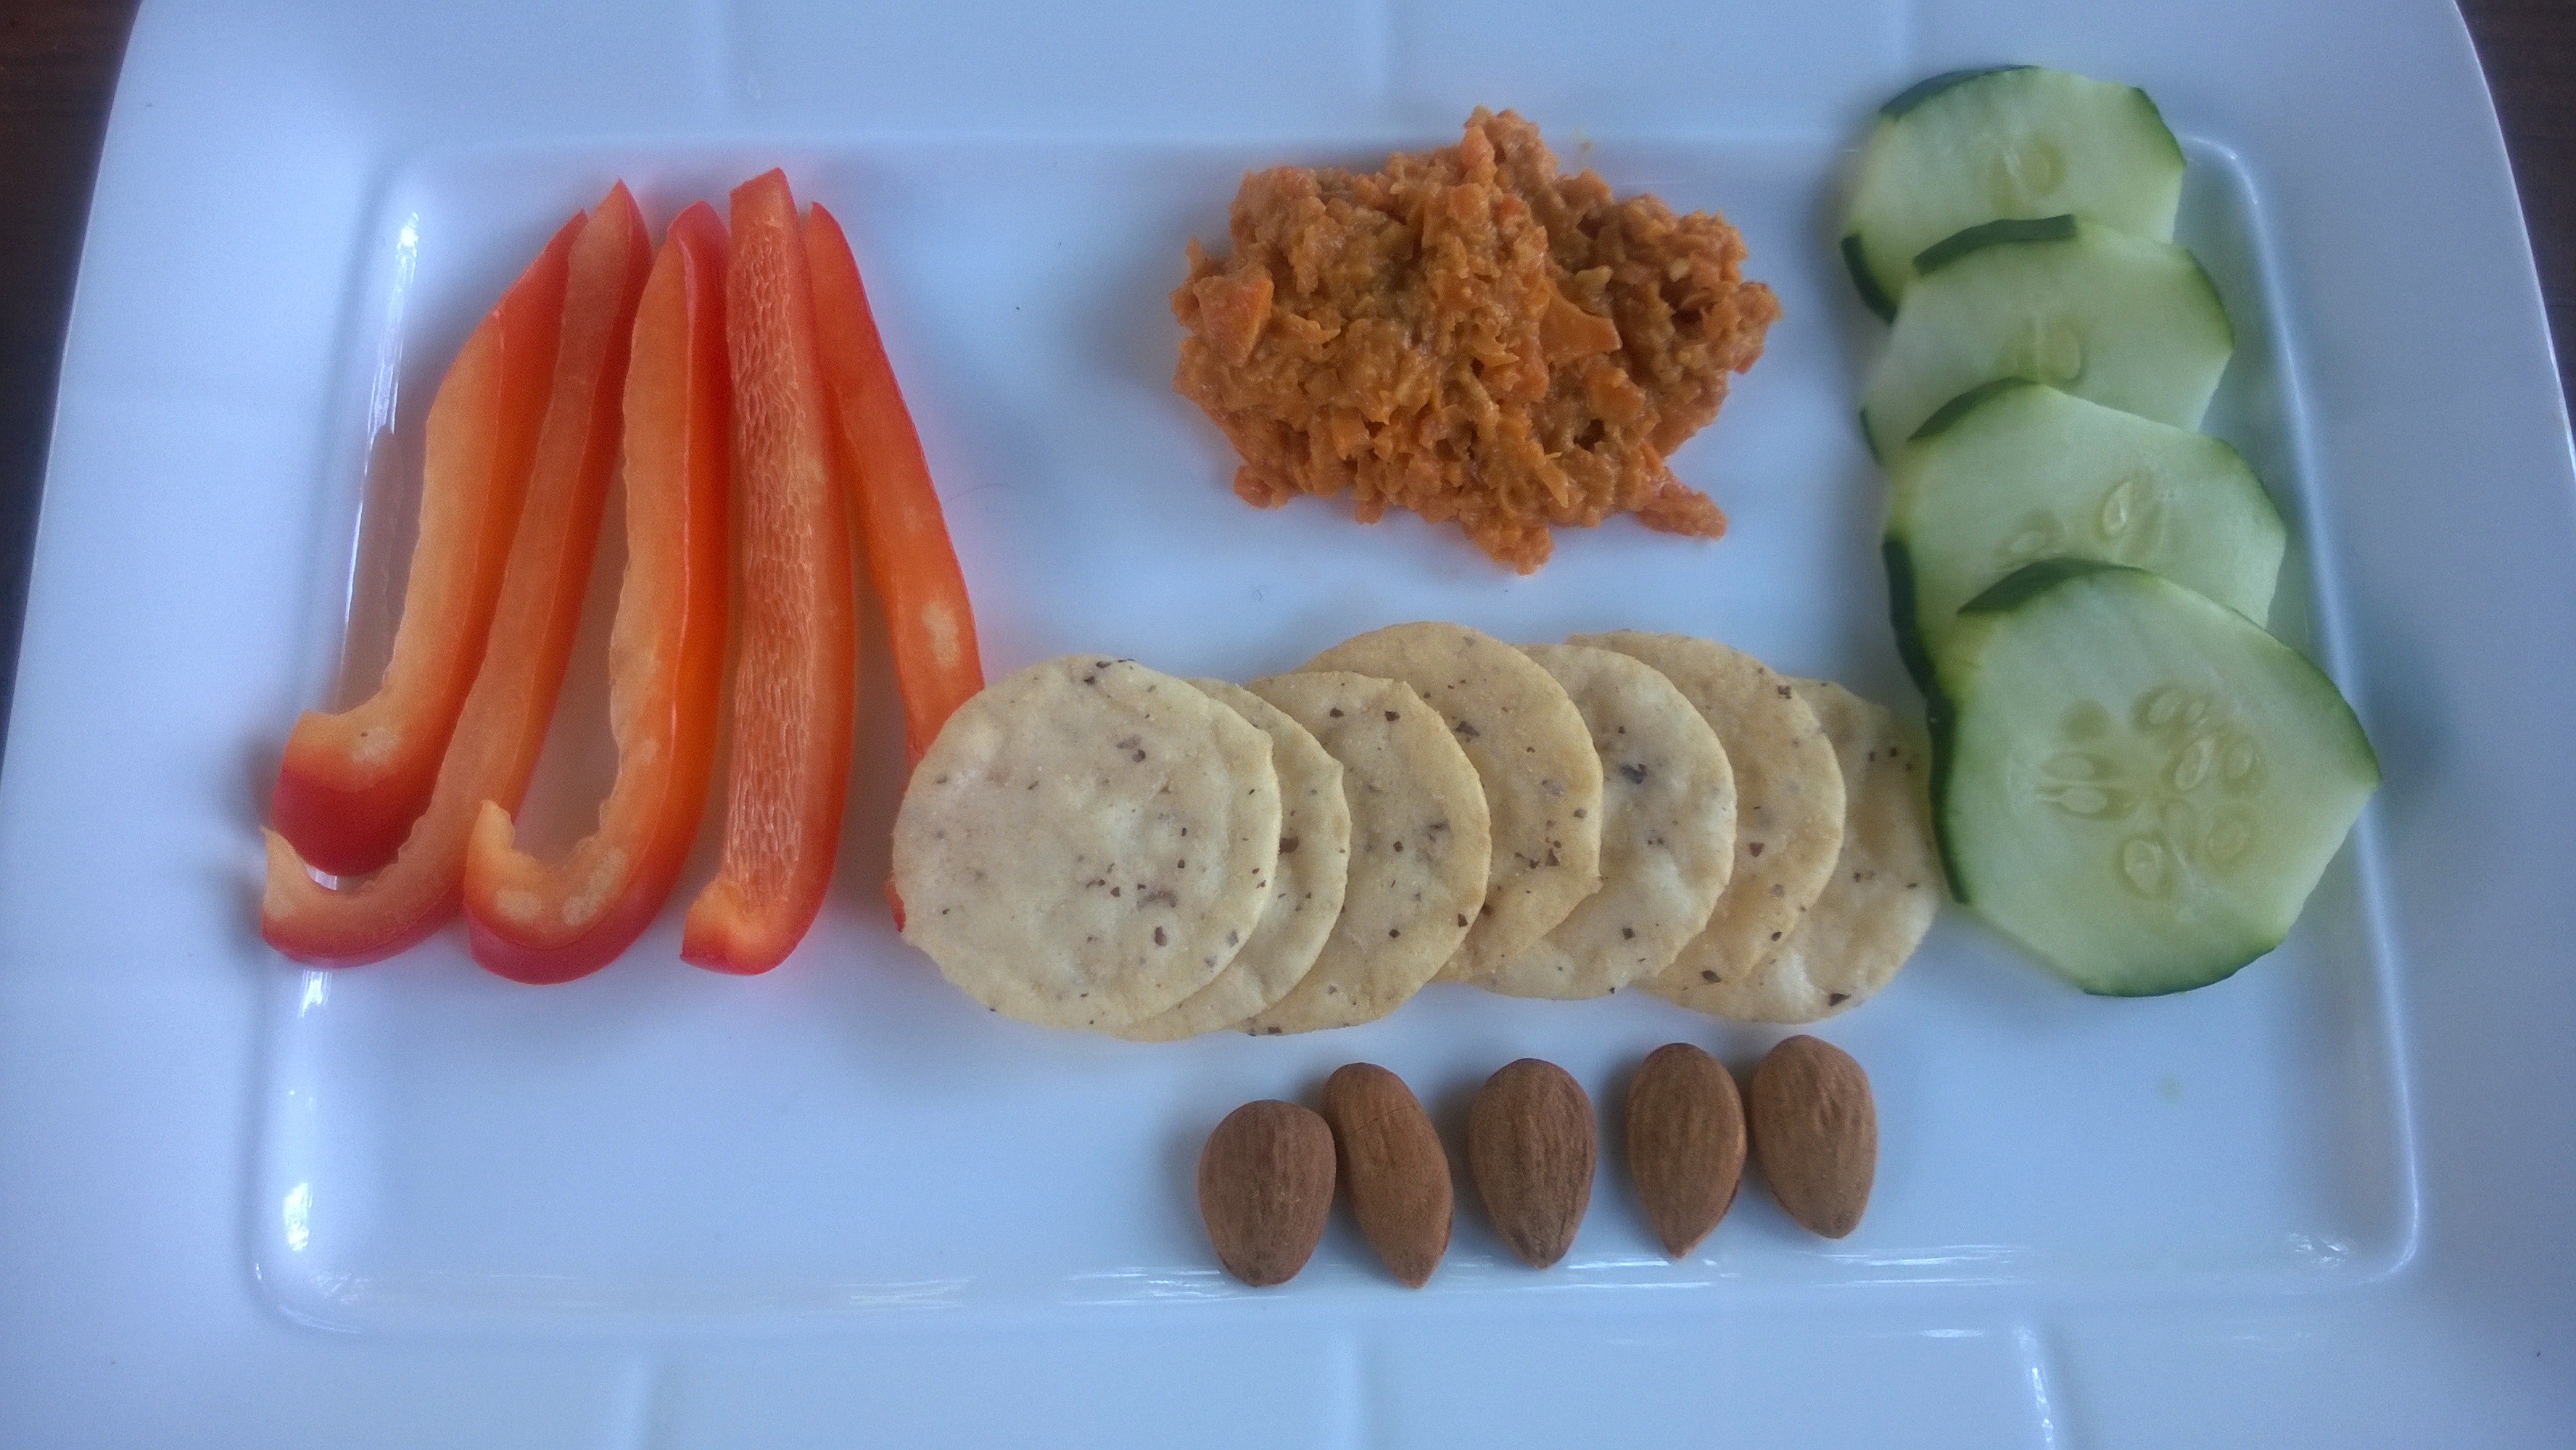 Make a Carrot Dip and serve with Asian inspired fixins!